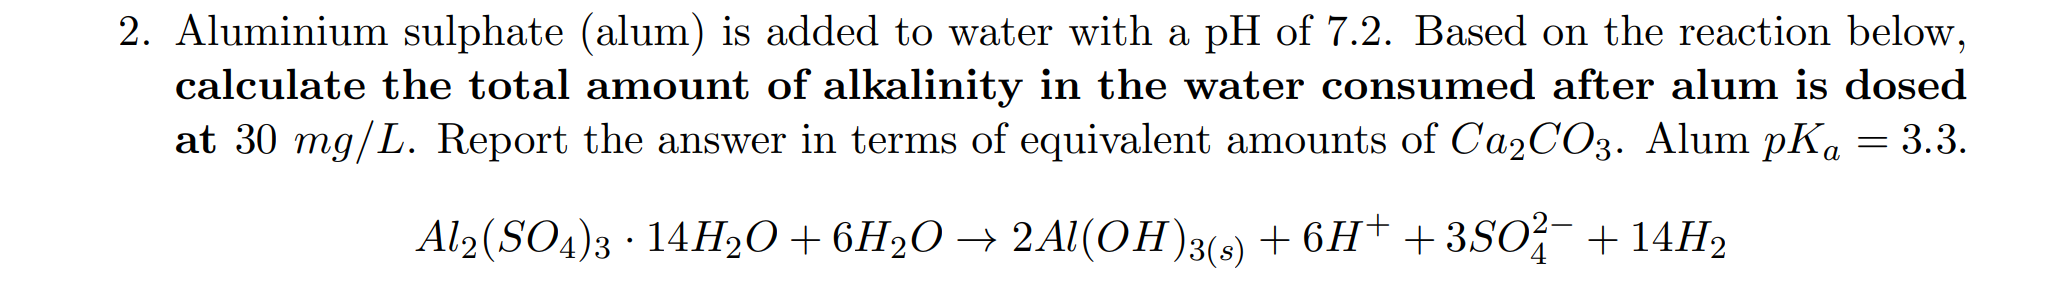 2. Aluminium sulphate (alum) is added to water with a pH of 7.2. Based on the reaction below,
calculate the total amount of alkalinity in the water consumed after alum is dosed
at 30 mg/L. Report the answer in terms of equivalent amounts of Ca2CO3. Alum pKa = 3.3.
Al2(SO4)3 · 14H2O+6H2O → 2Al(OH)3(s) + 6H†+3SO;- + 14H2
